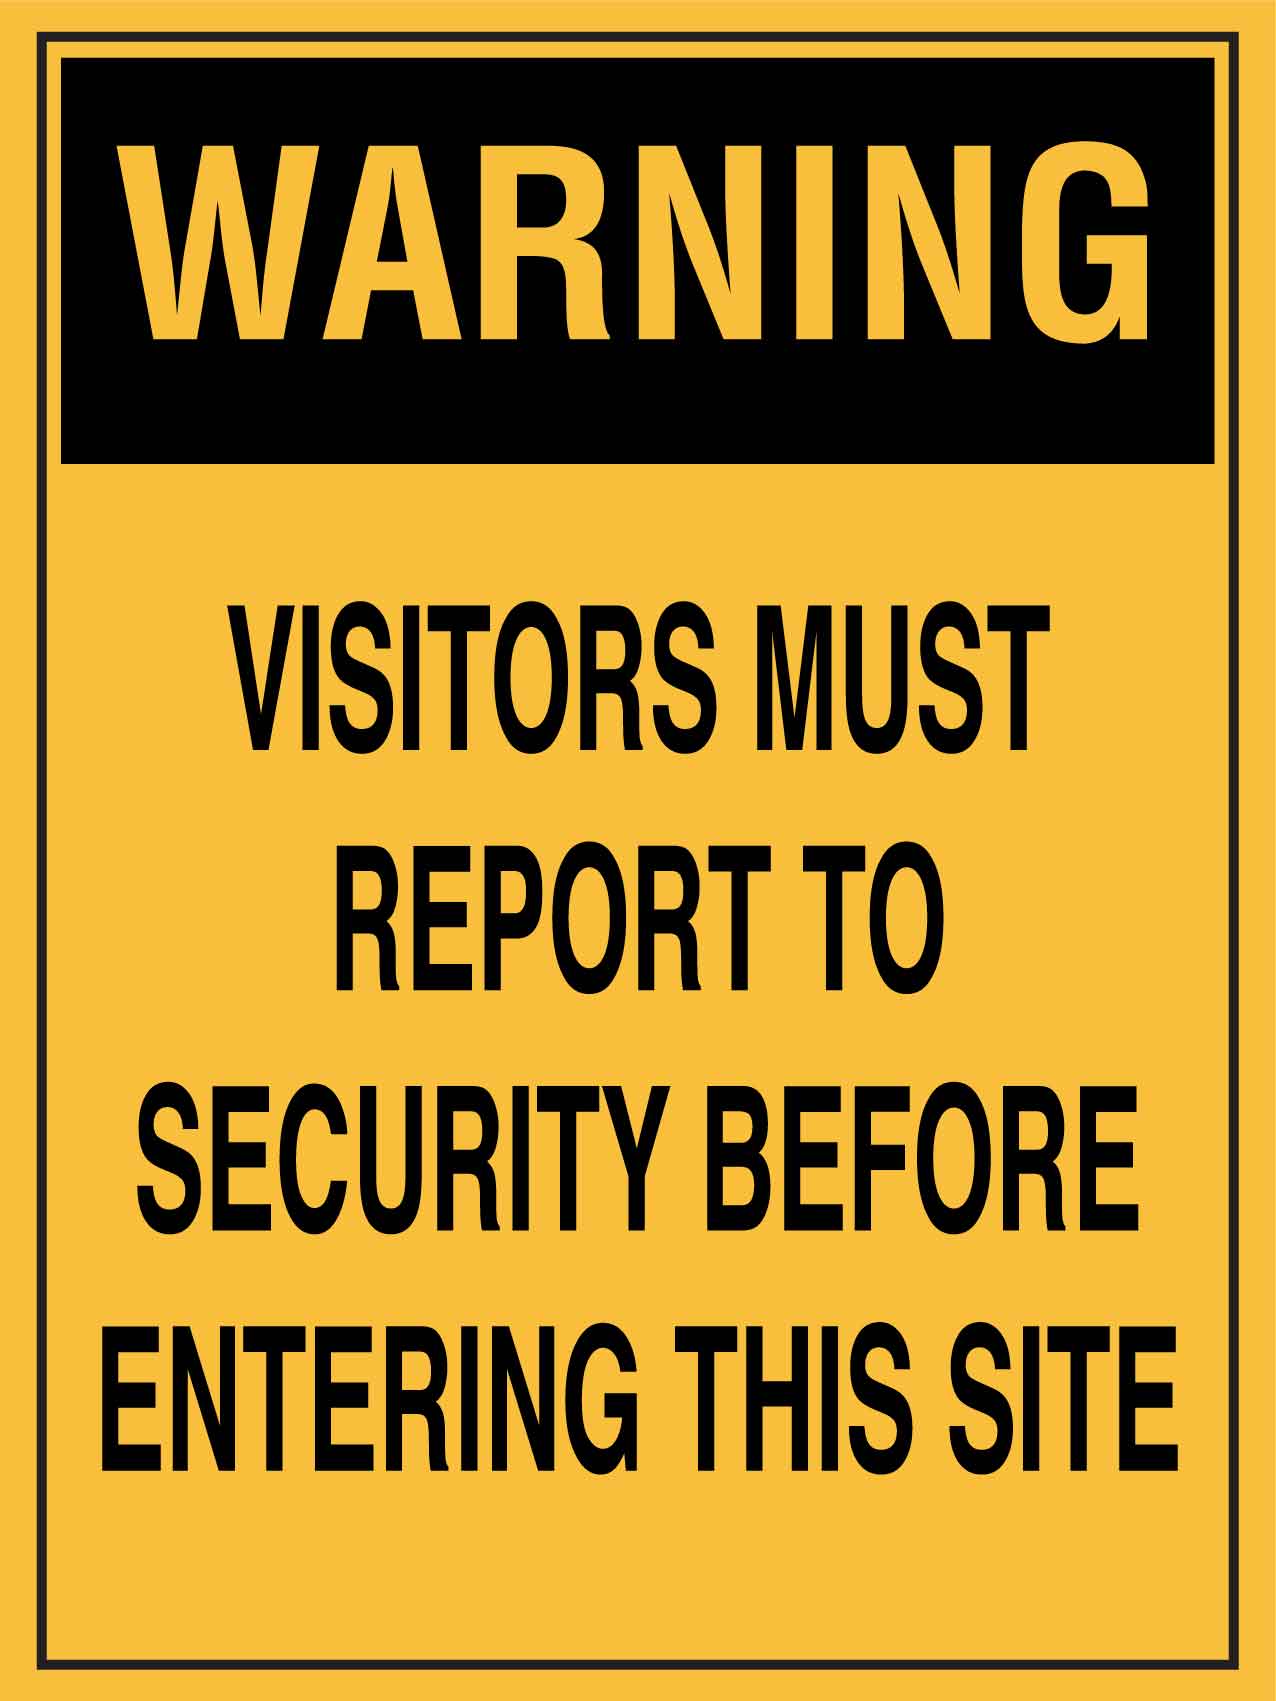 Warning Visitors Must Report to Security Before Entering This Site Sign